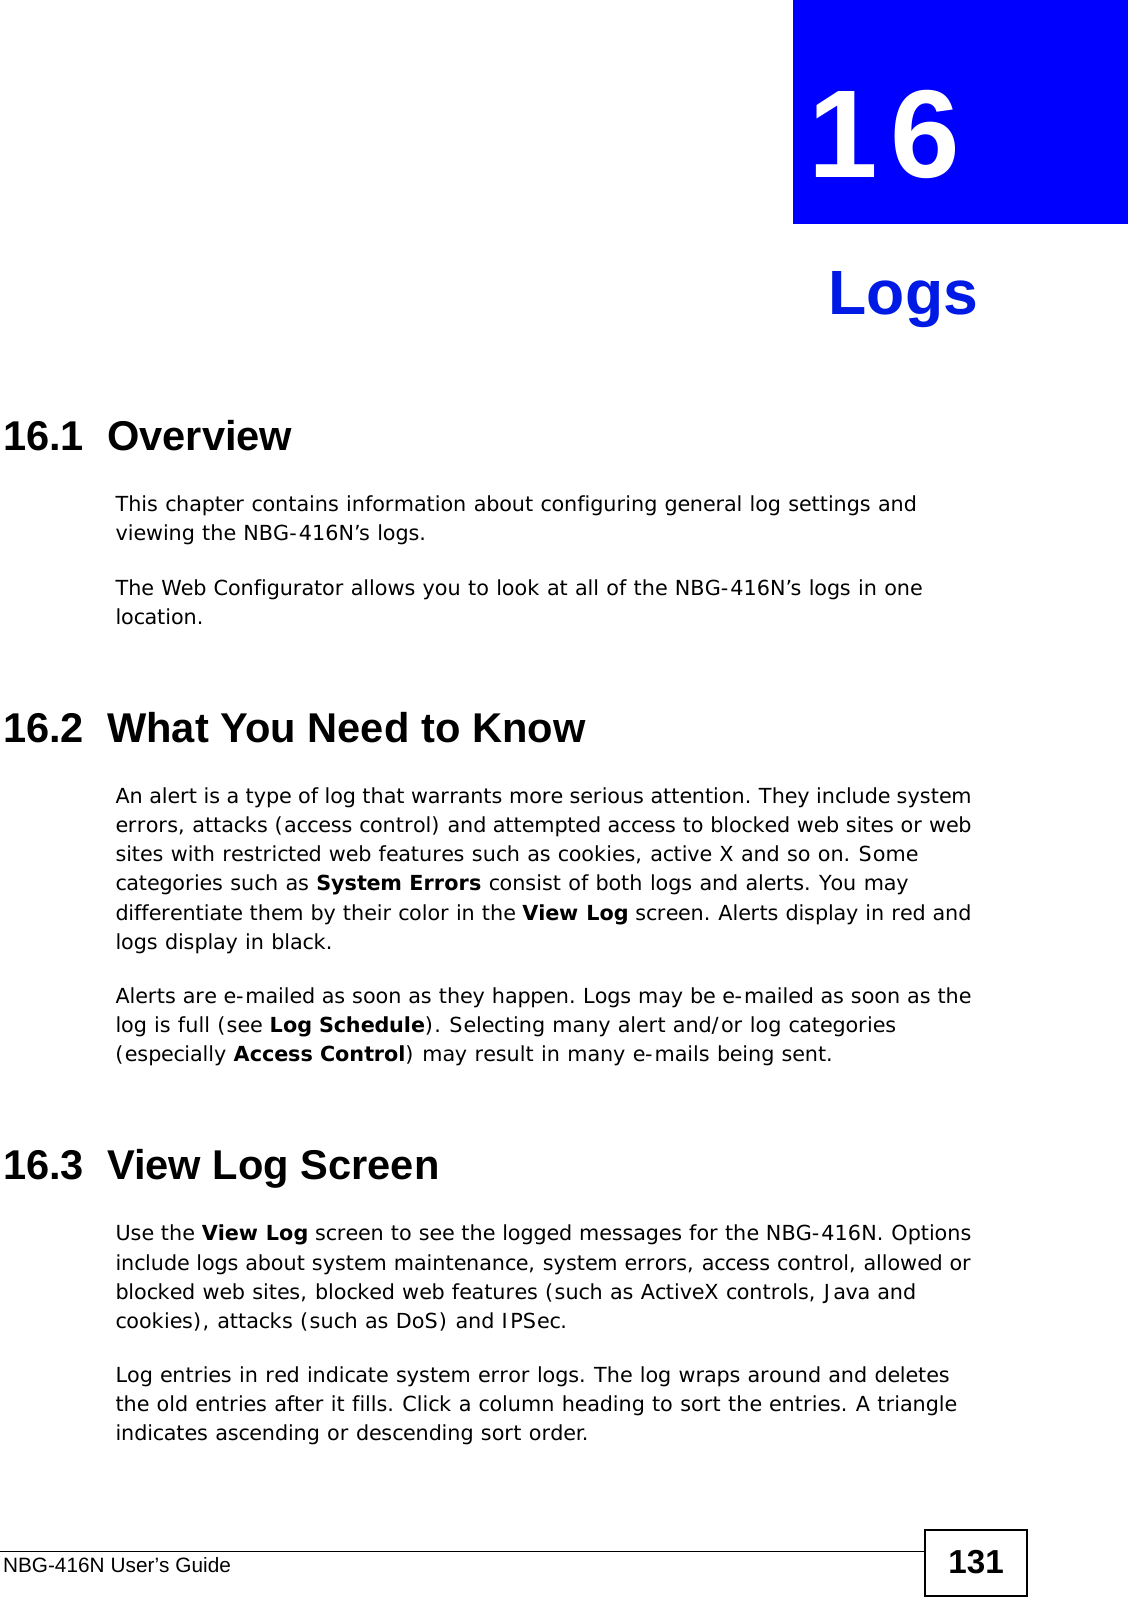 NBG-416N User’s Guide 131CHAPTER  16 Logs16.1  OverviewThis chapter contains information about configuring general log settings and viewing the NBG-416N’s logs. The Web Configurator allows you to look at all of the NBG-416N’s logs in one location. 16.2  What You Need to KnowAn alert is a type of log that warrants more serious attention. They include system errors, attacks (access control) and attempted access to blocked web sites or web sites with restricted web features such as cookies, active X and so on. Some categories such as System Errors consist of both logs and alerts. You may differentiate them by their color in the View Log screen. Alerts display in red and logs display in black.Alerts are e-mailed as soon as they happen. Logs may be e-mailed as soon as the log is full (see Log Schedule). Selecting many alert and/or log categories (especially Access Control) may result in many e-mails being sent.16.3  View Log ScreenUse the View Log screen to see the logged messages for the NBG-416N. Options include logs about system maintenance, system errors, access control, allowed or blocked web sites, blocked web features (such as ActiveX controls, Java and cookies), attacks (such as DoS) and IPSec.Log entries in red indicate system error logs. The log wraps around and deletes the old entries after it fills. Click a column heading to sort the entries. A triangle indicates ascending or descending sort order. 